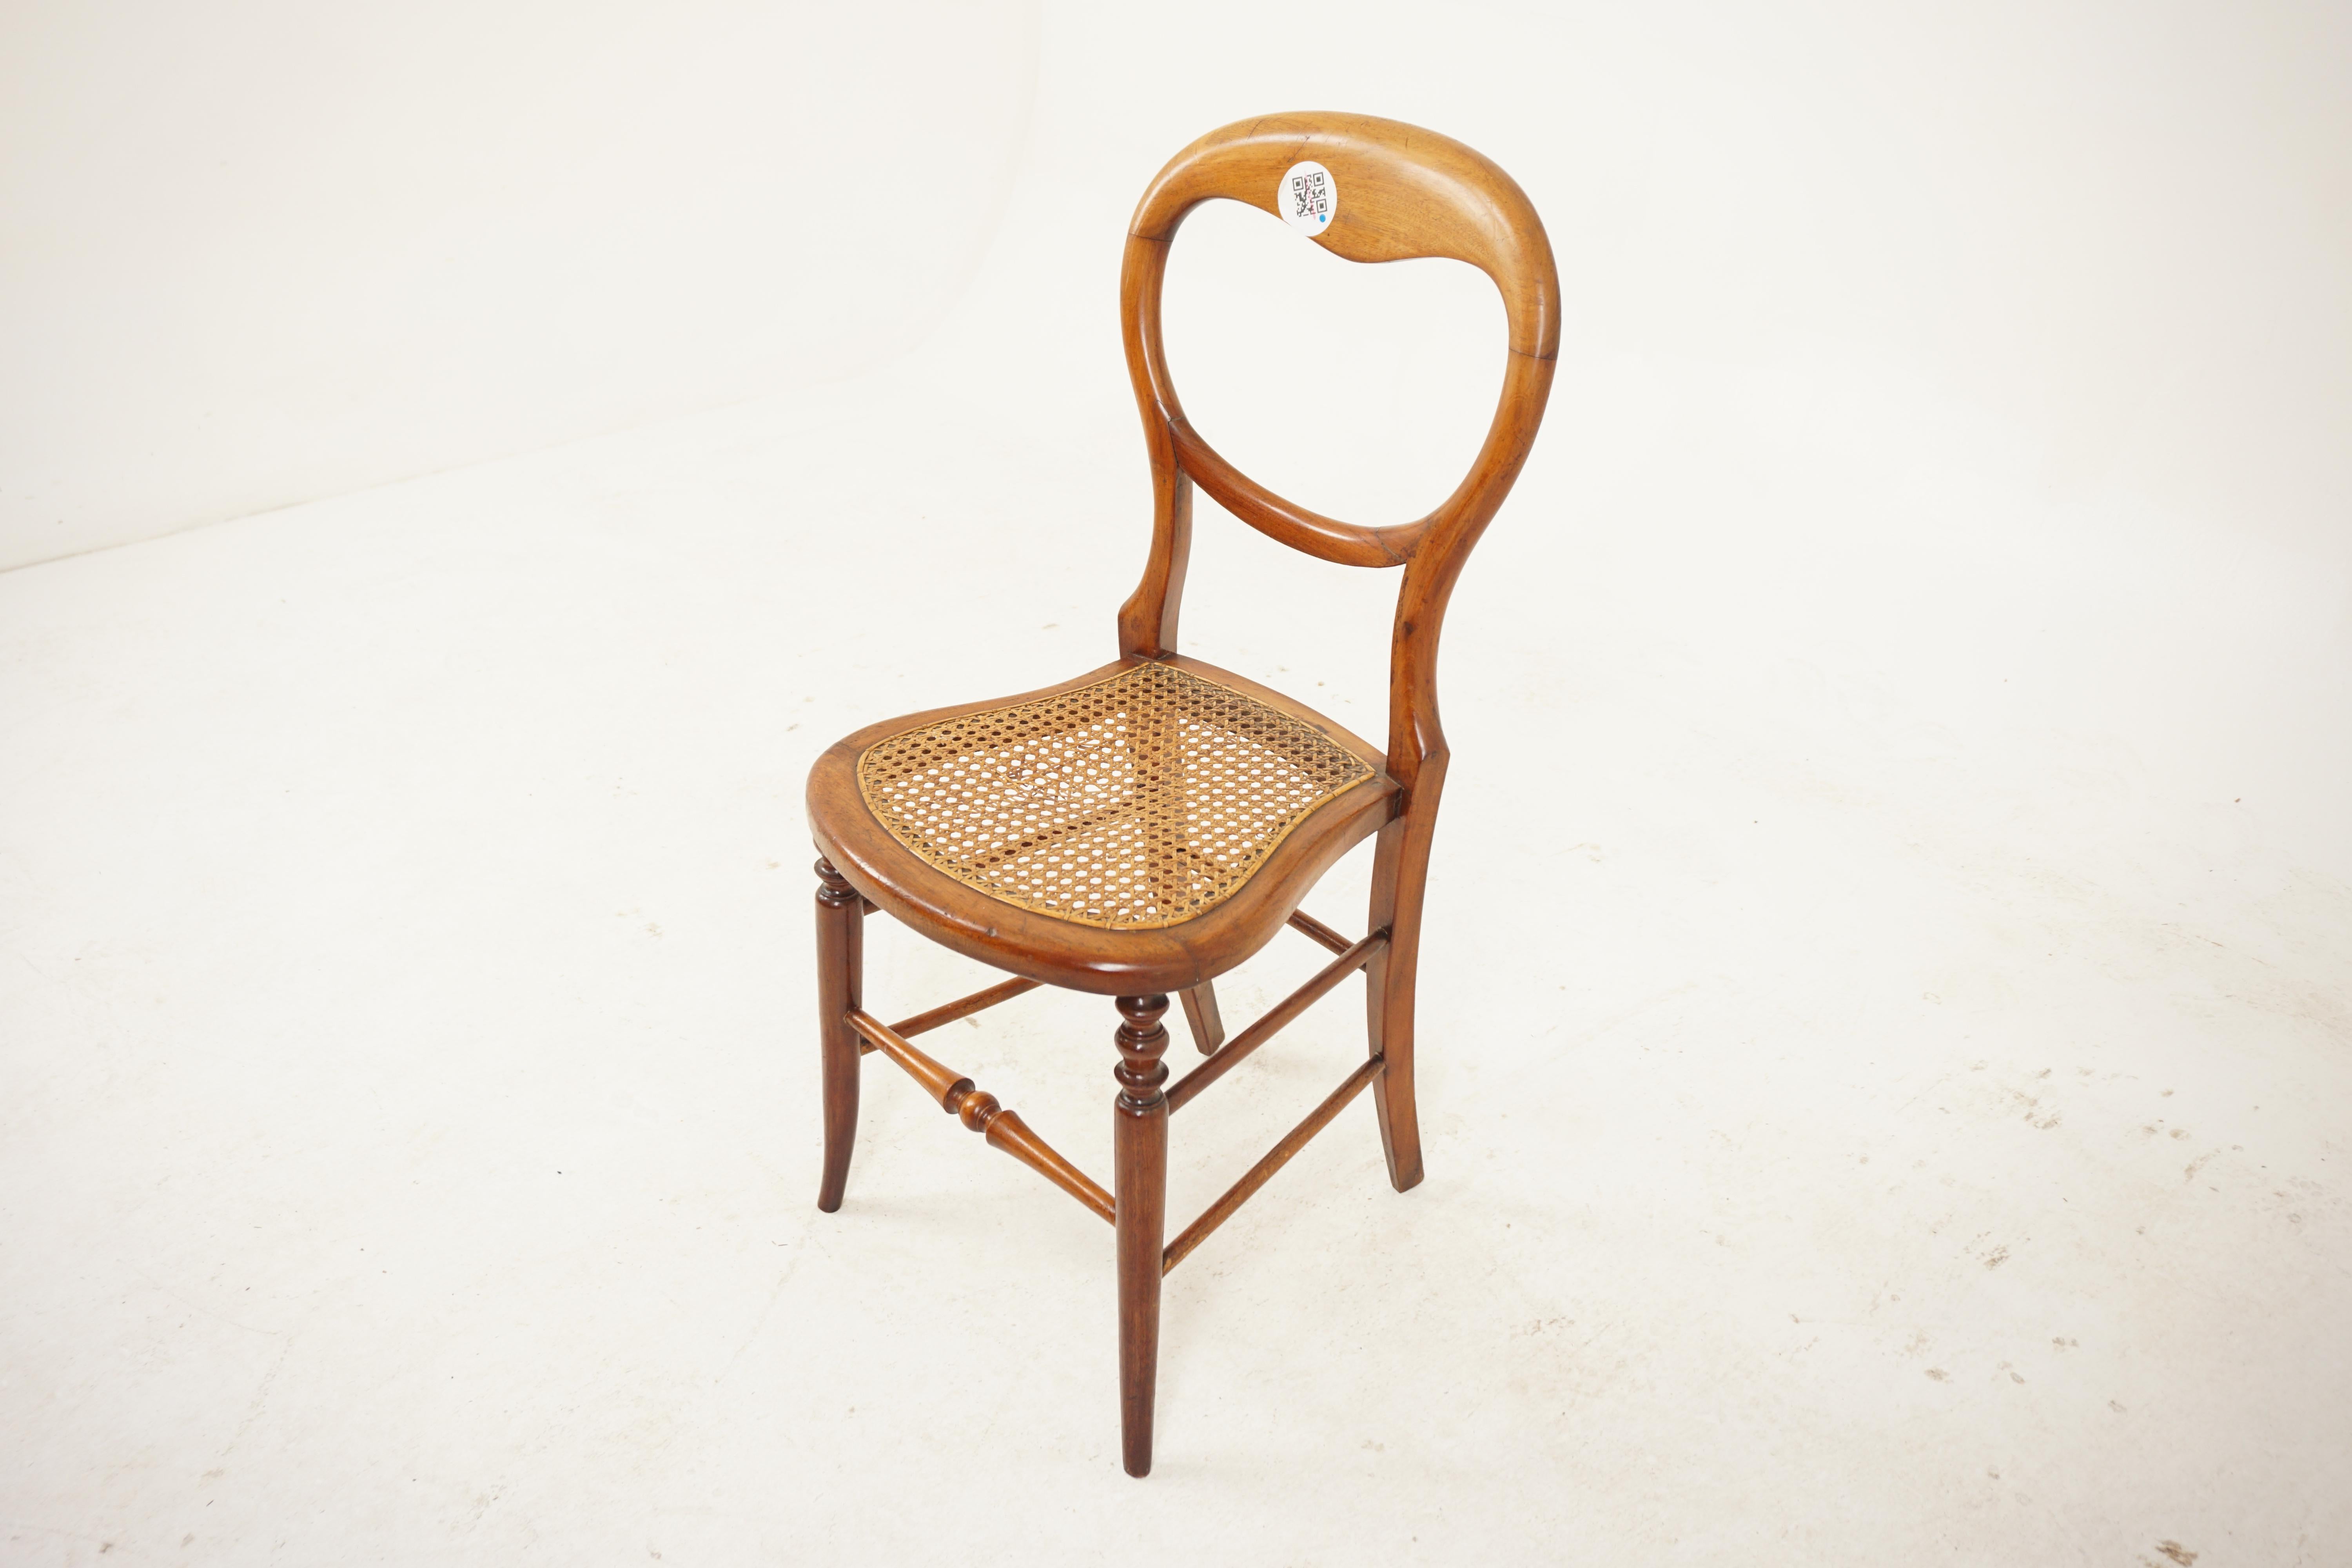 Single Victorian walnut balloon back bedroom chair, Scotland 1890, H496

Scotland 1890
Solid Walnut
Original Finish
Shaped top rail
Shaped caned seat
All standing on turned front legs
Connected by stretchers below
Please note slight wear to